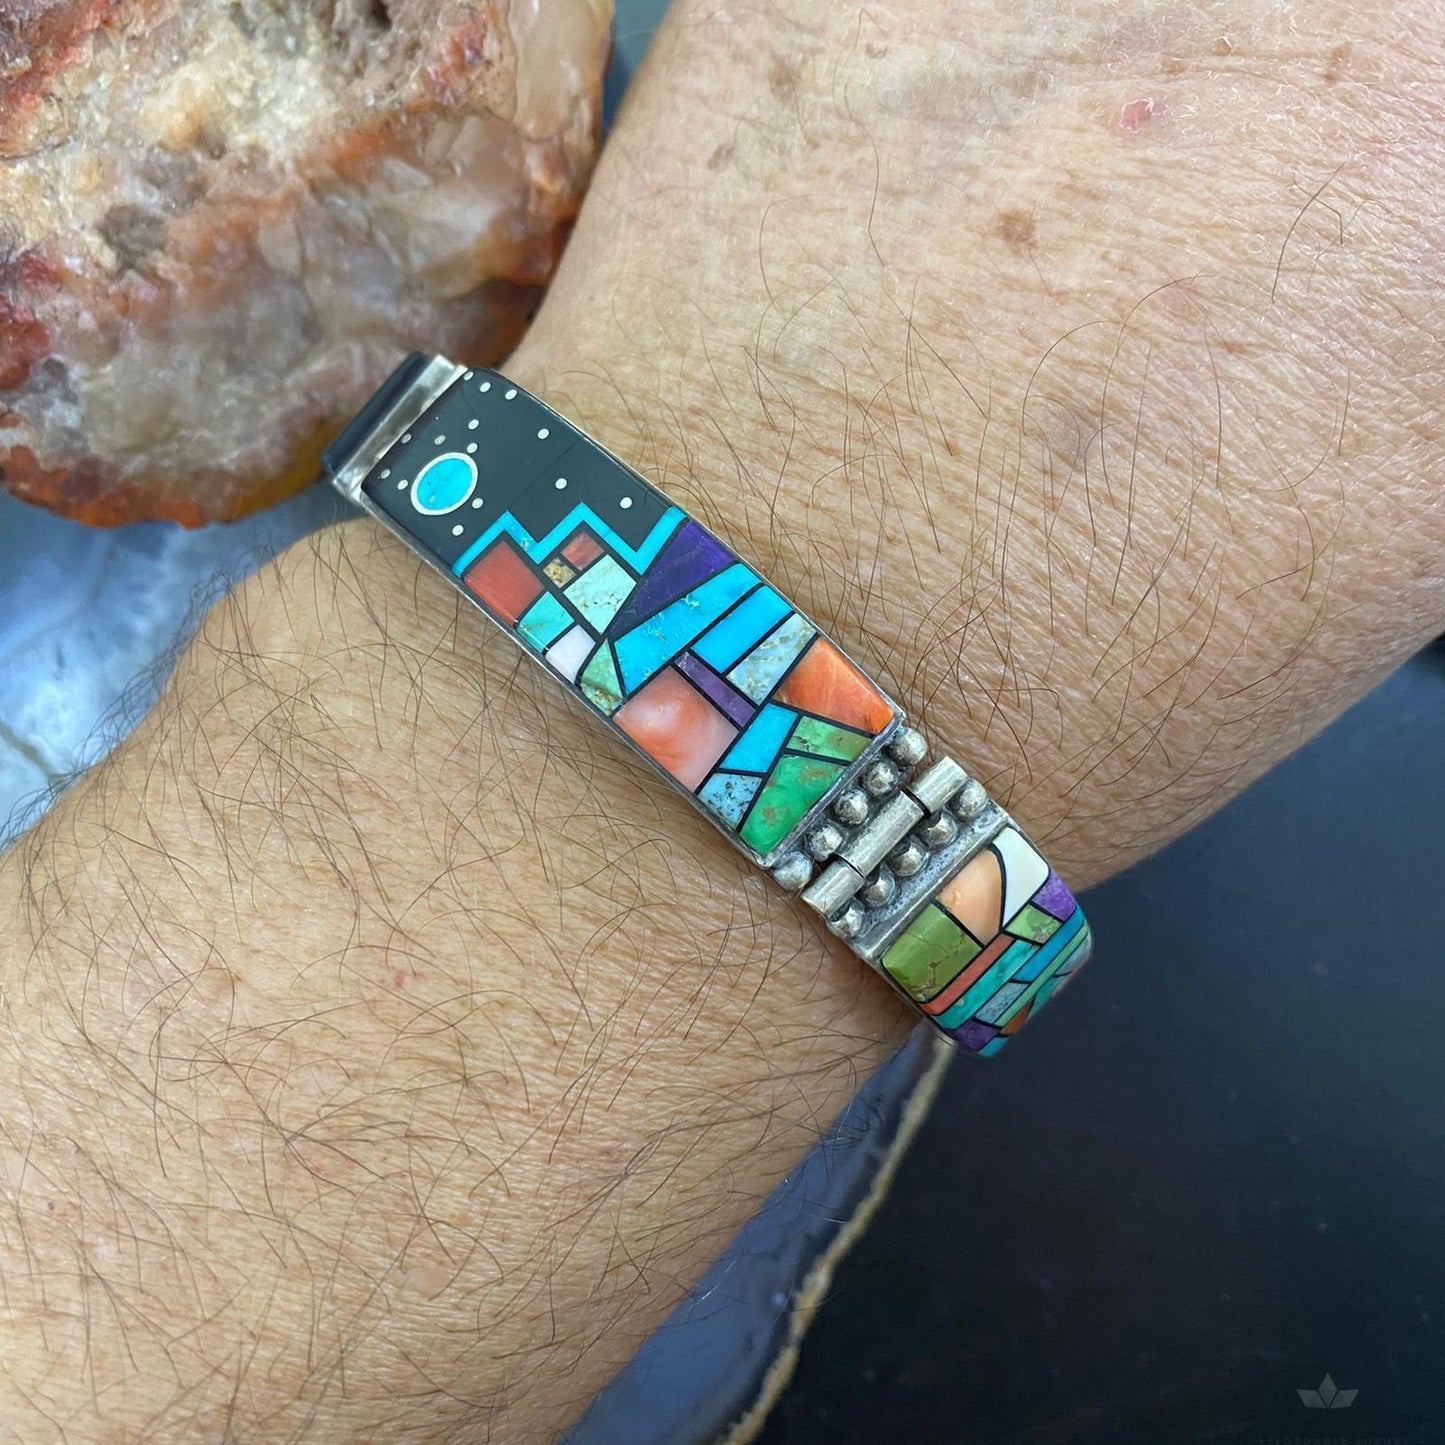 Bryon Yellowhorse Vintage Native American Sterling Inlay Link Bracelet For Men